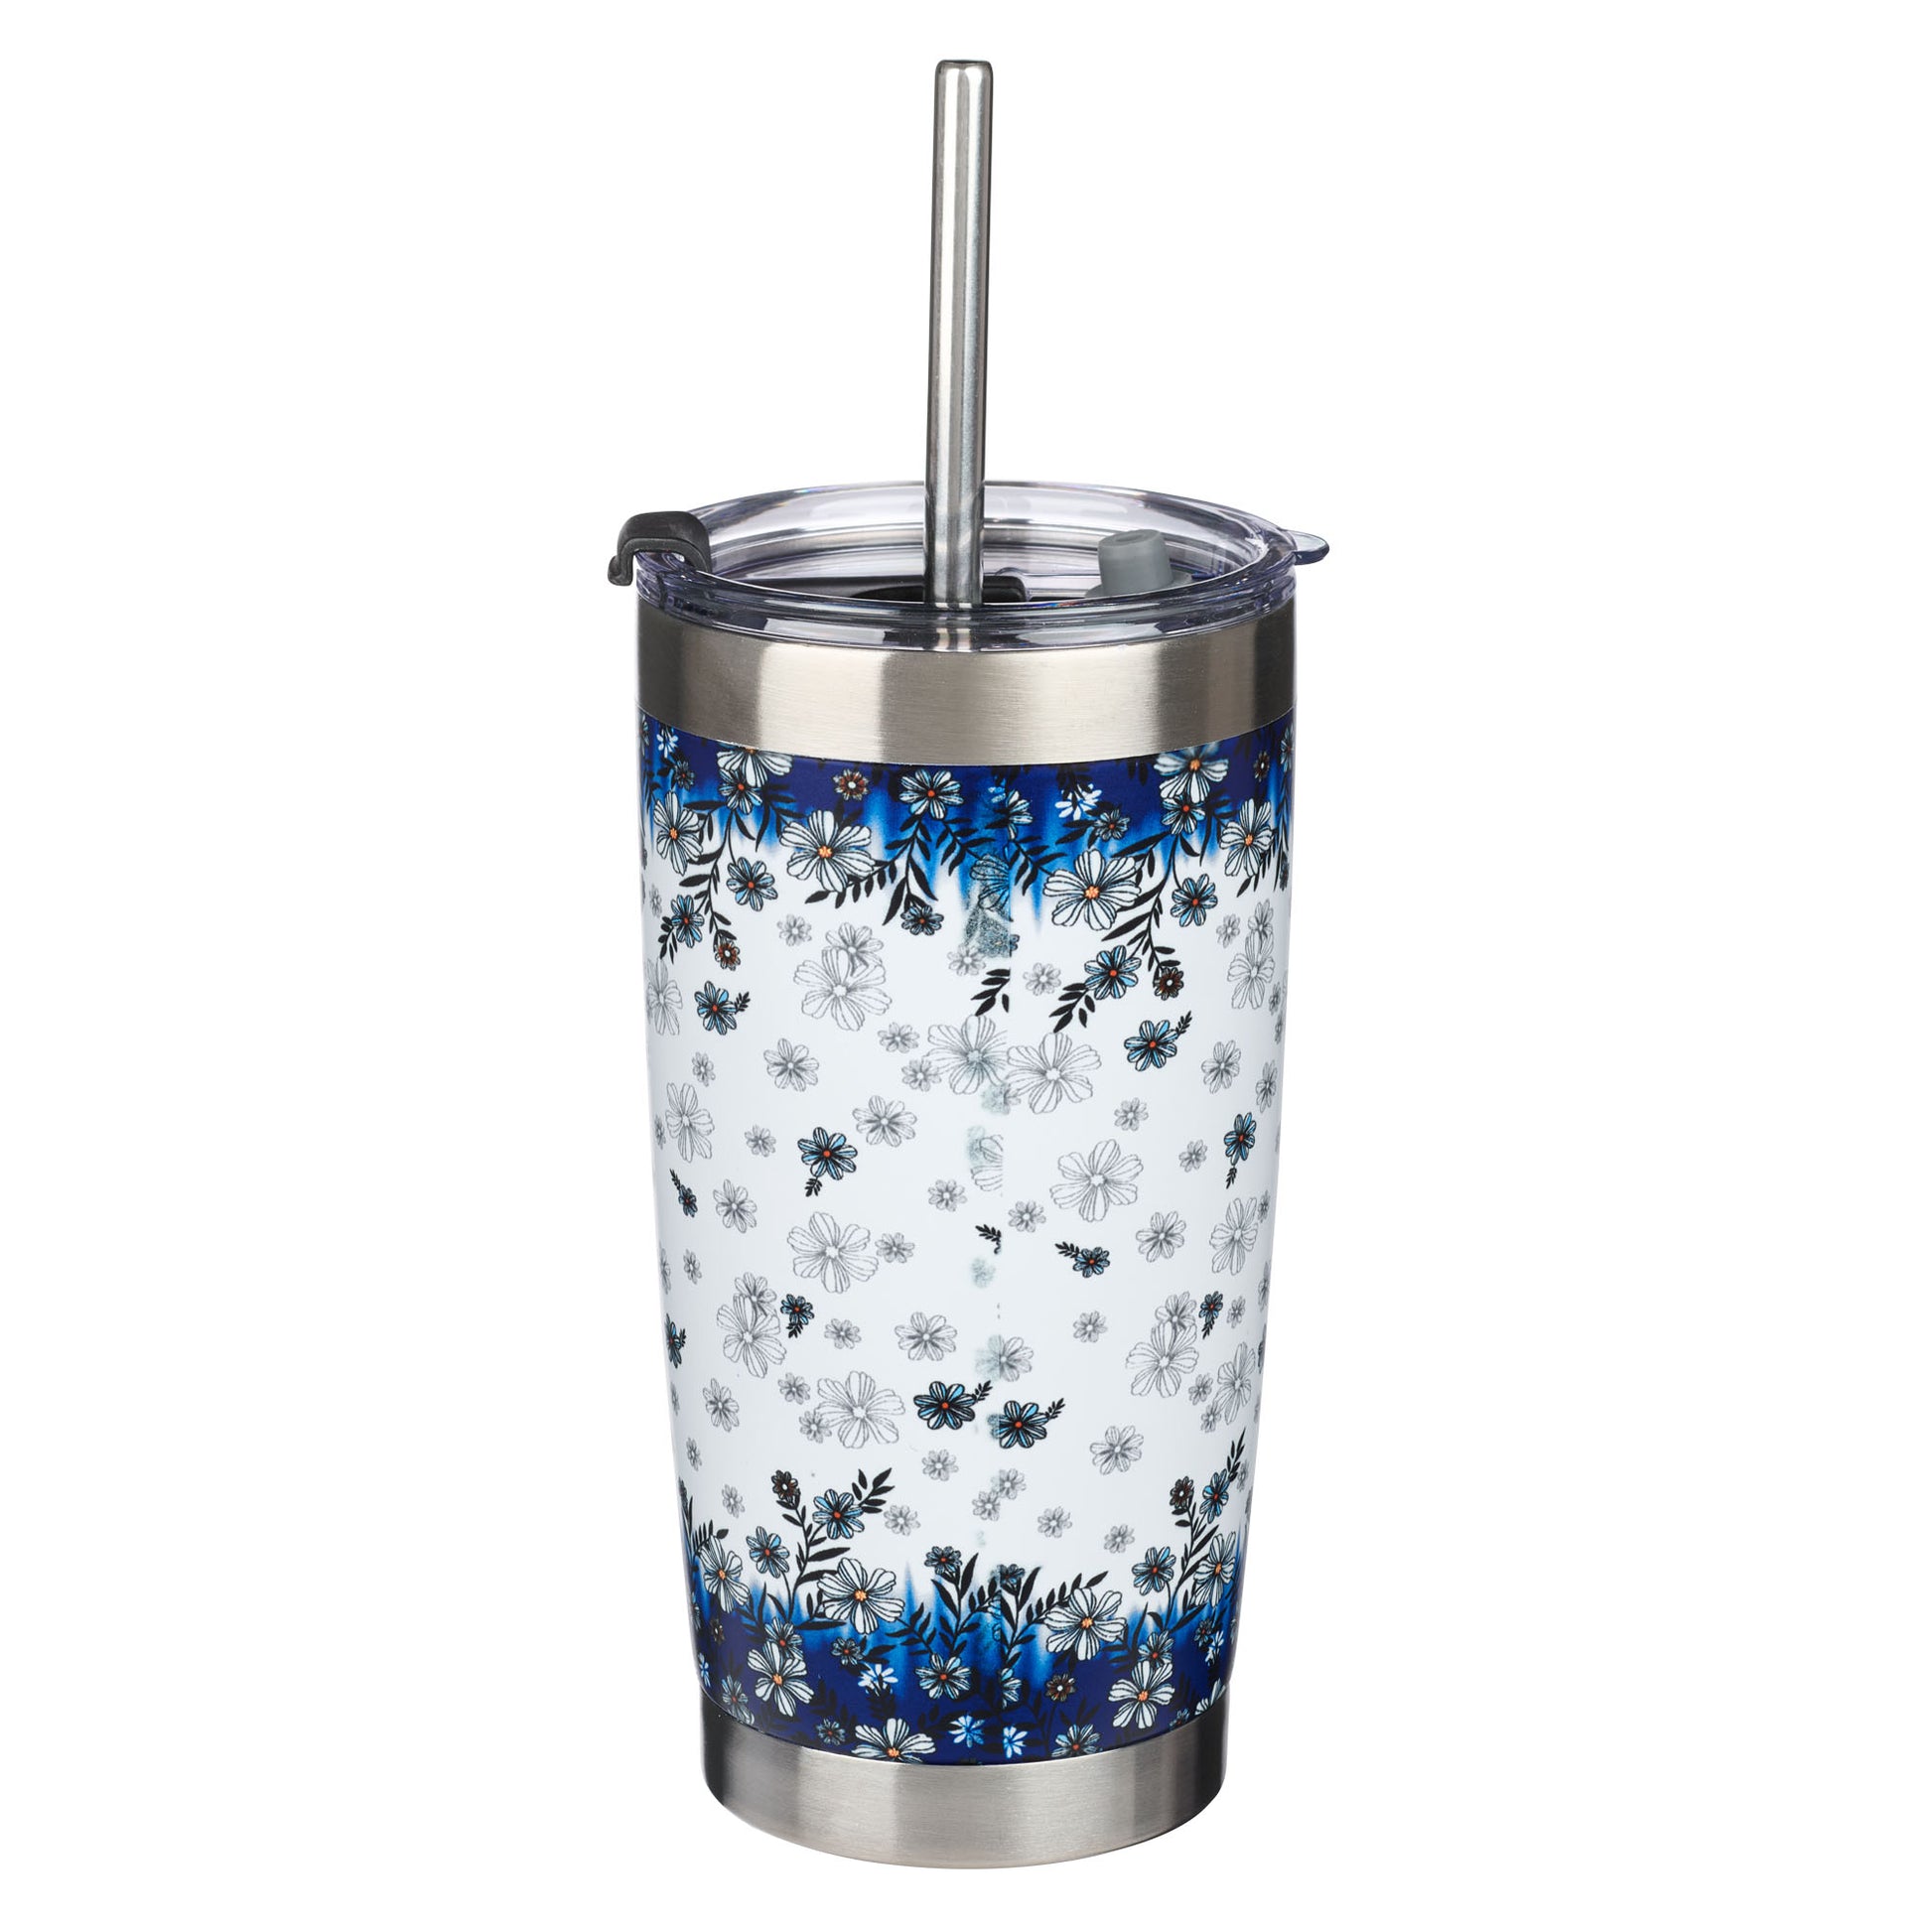 Be Still & Know Blue Floral Stainless Steel Travel Mug with Reusable Stainless Steel Straw - Psalm 46:10 - The Christian Gift Company